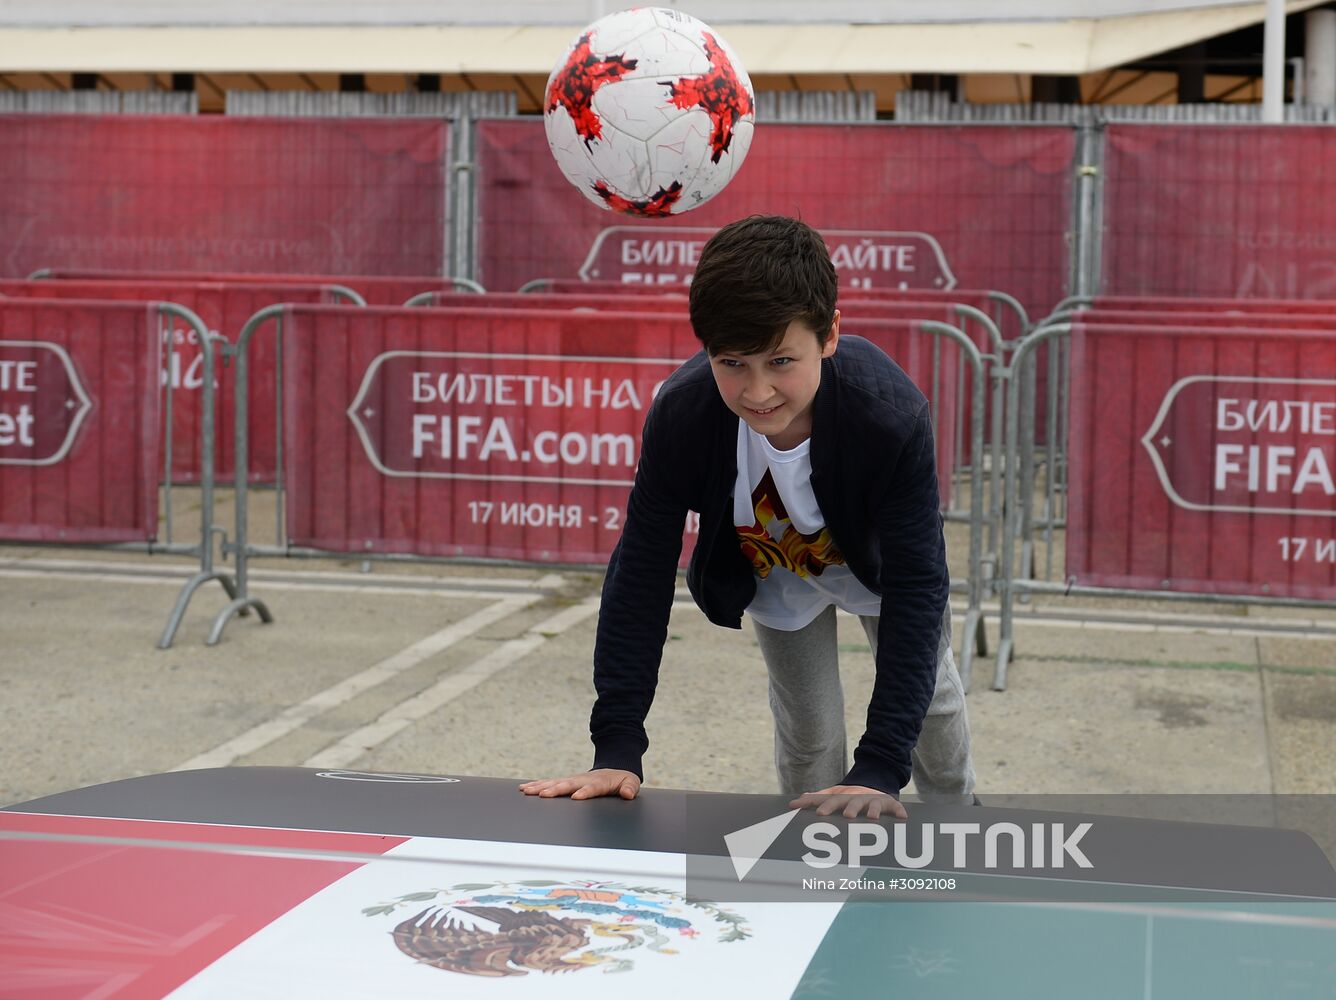 2017 Confederations Cup Park opened in Sochi